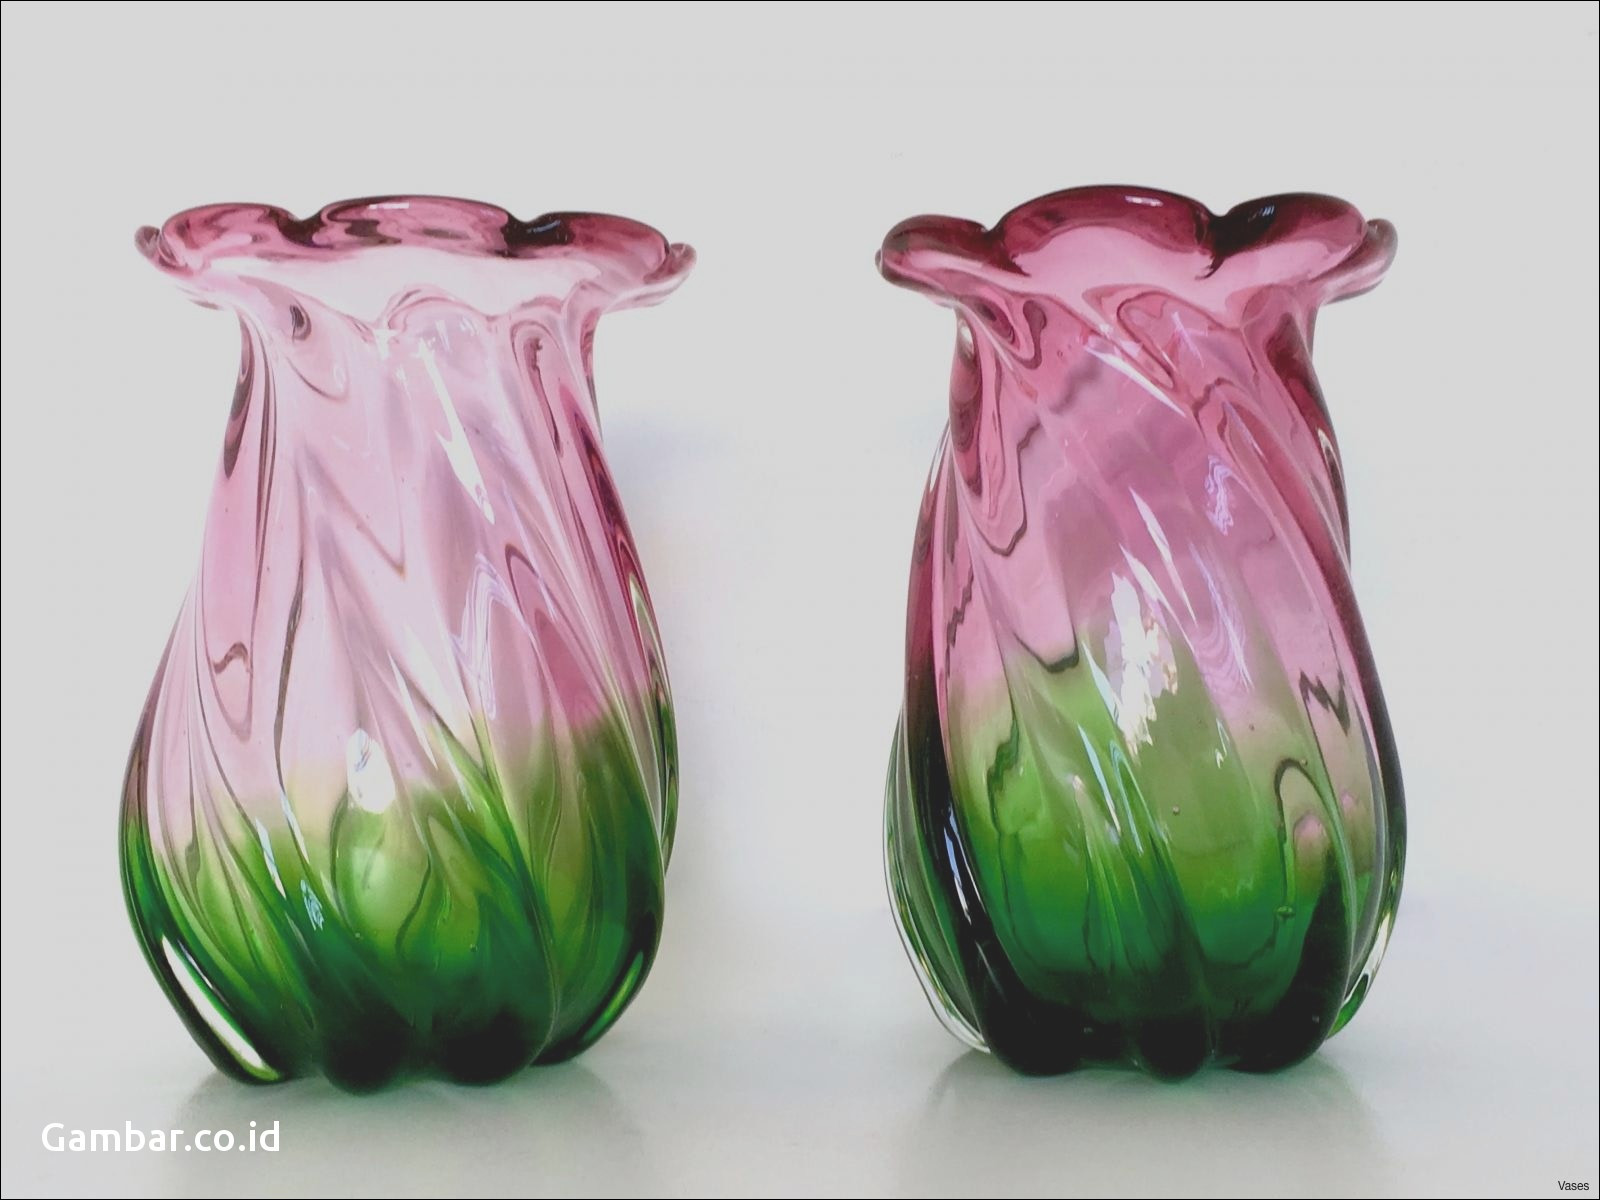 17 Great Murano Glass Vases for Sale 2022 free download murano glass vases for sale of download gambar red and green wallpaper ruby red murano glass vase pertaining to download image